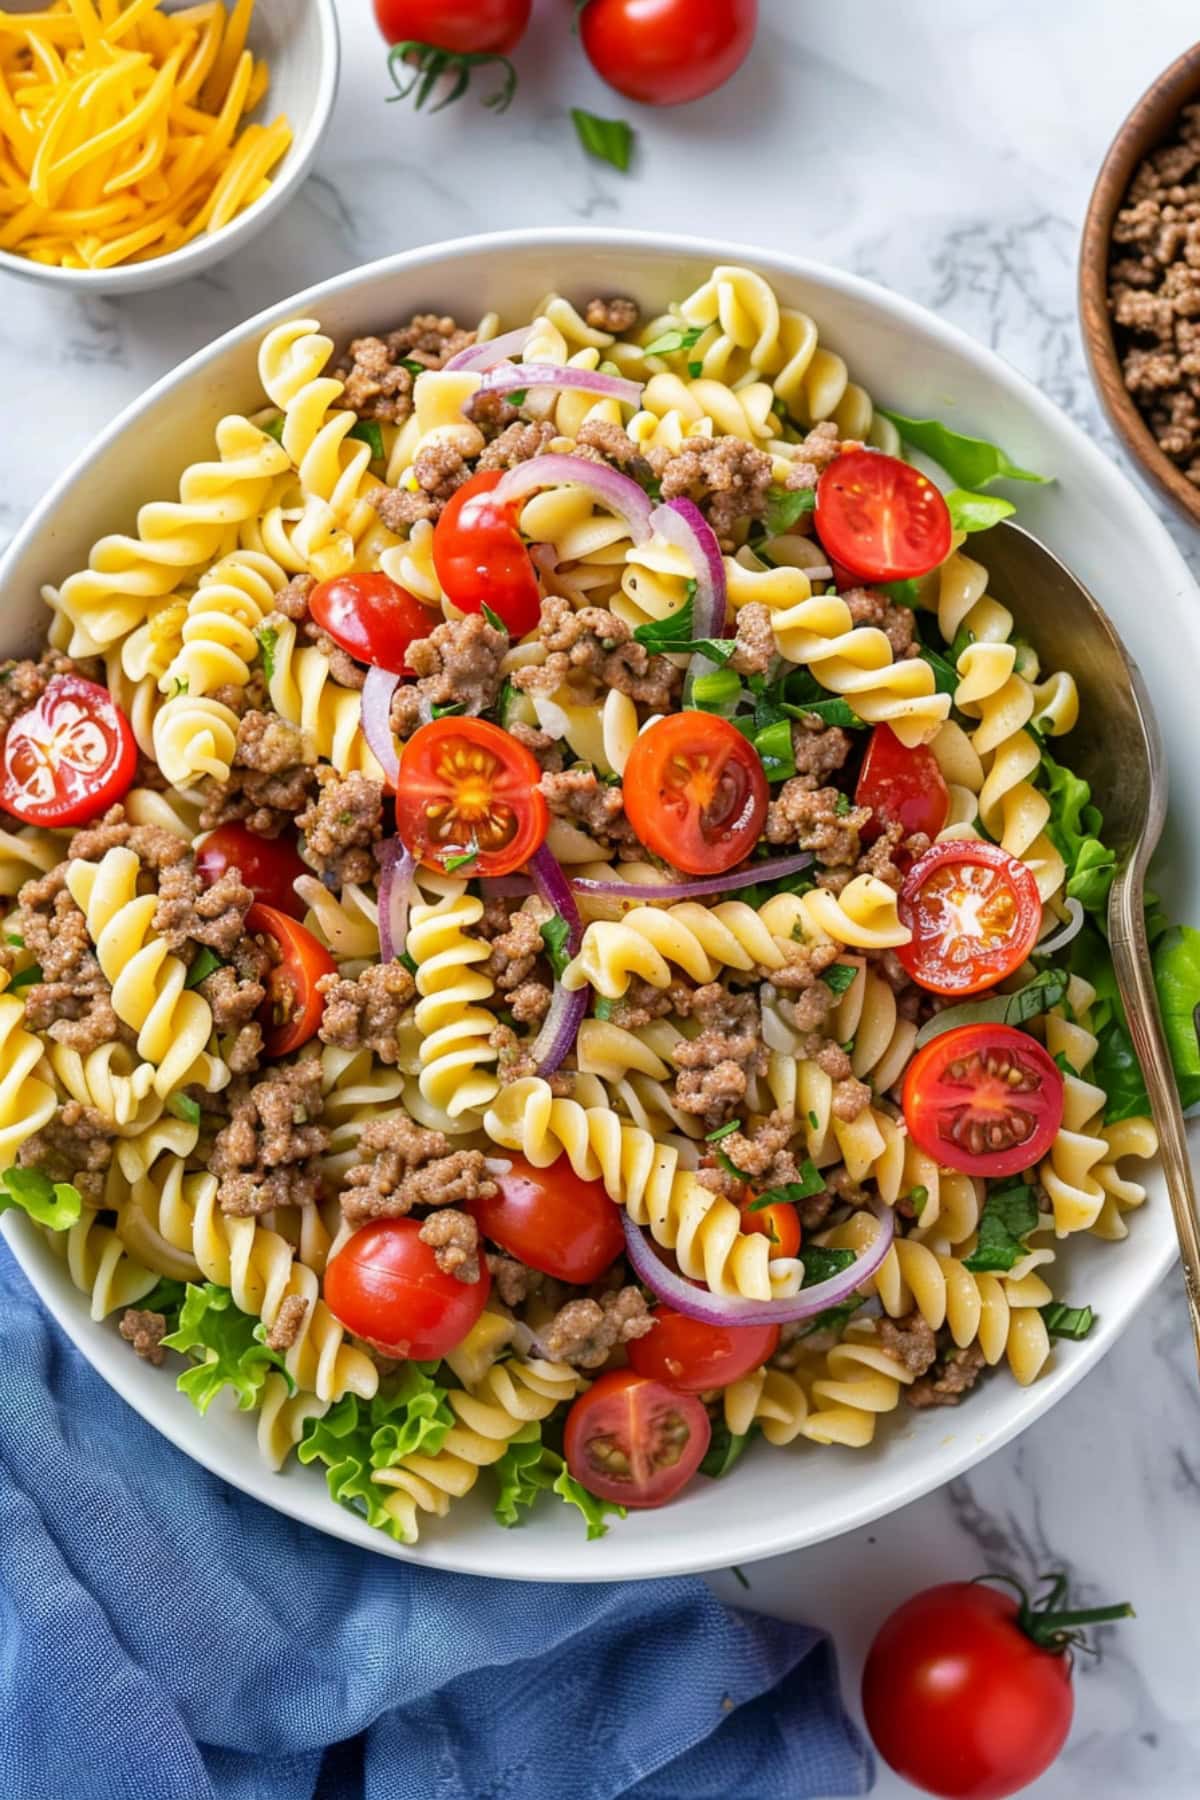 Refreshing Jimmy Buffett pasta salad with ground beef, red onions and lettuce.